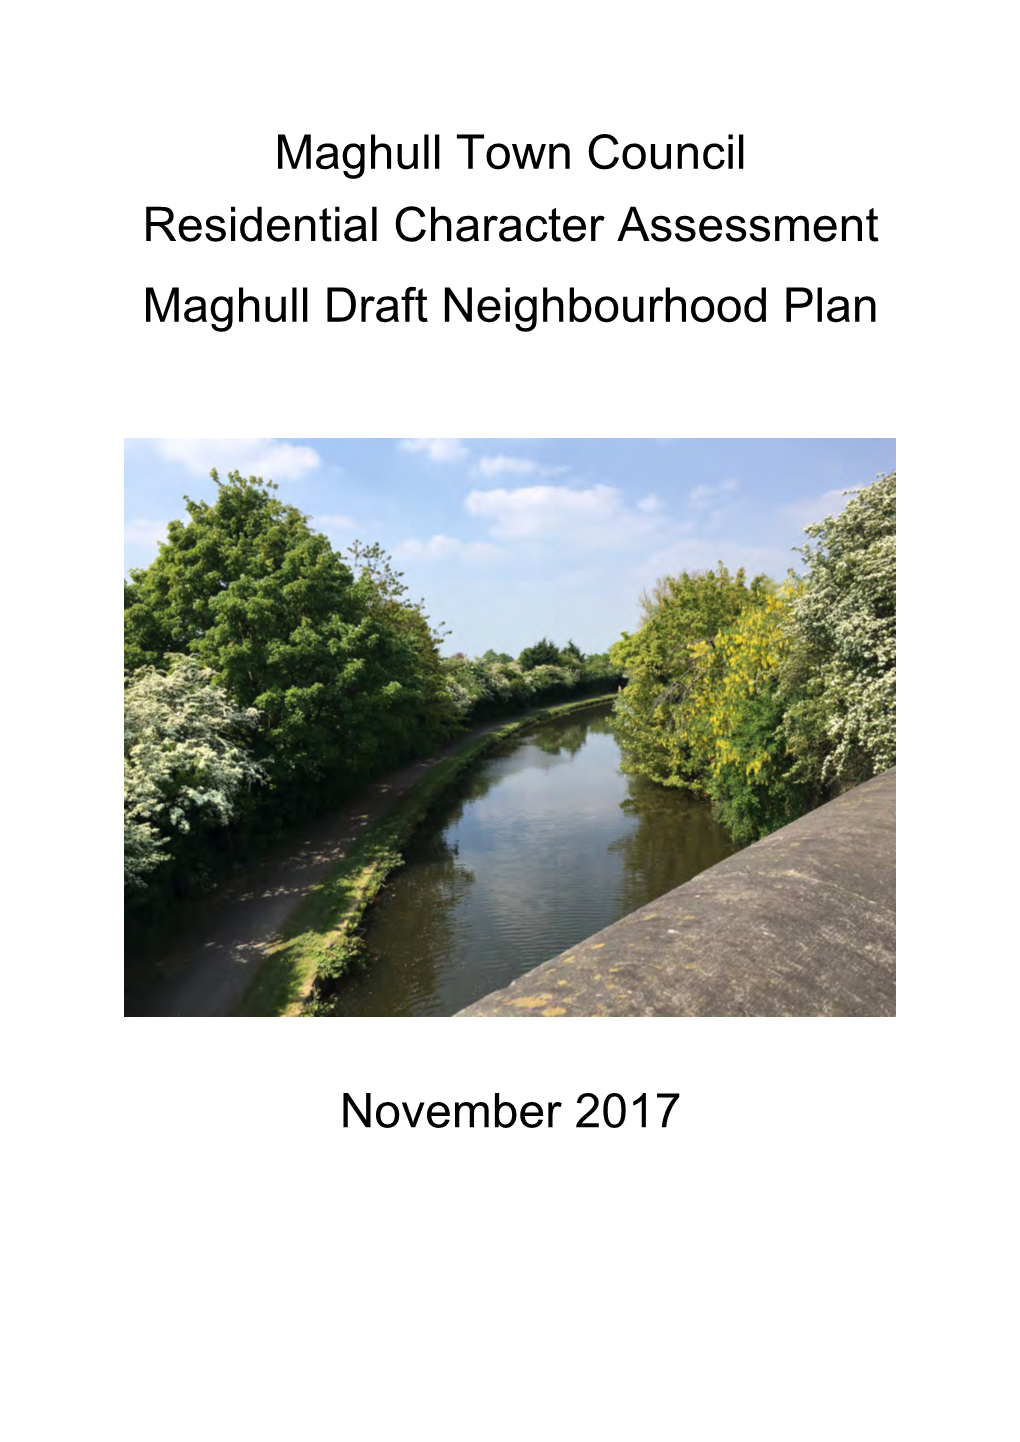 Maghull Town Council Residential Character Assessment Maghull Draft Neighbourhood Plan